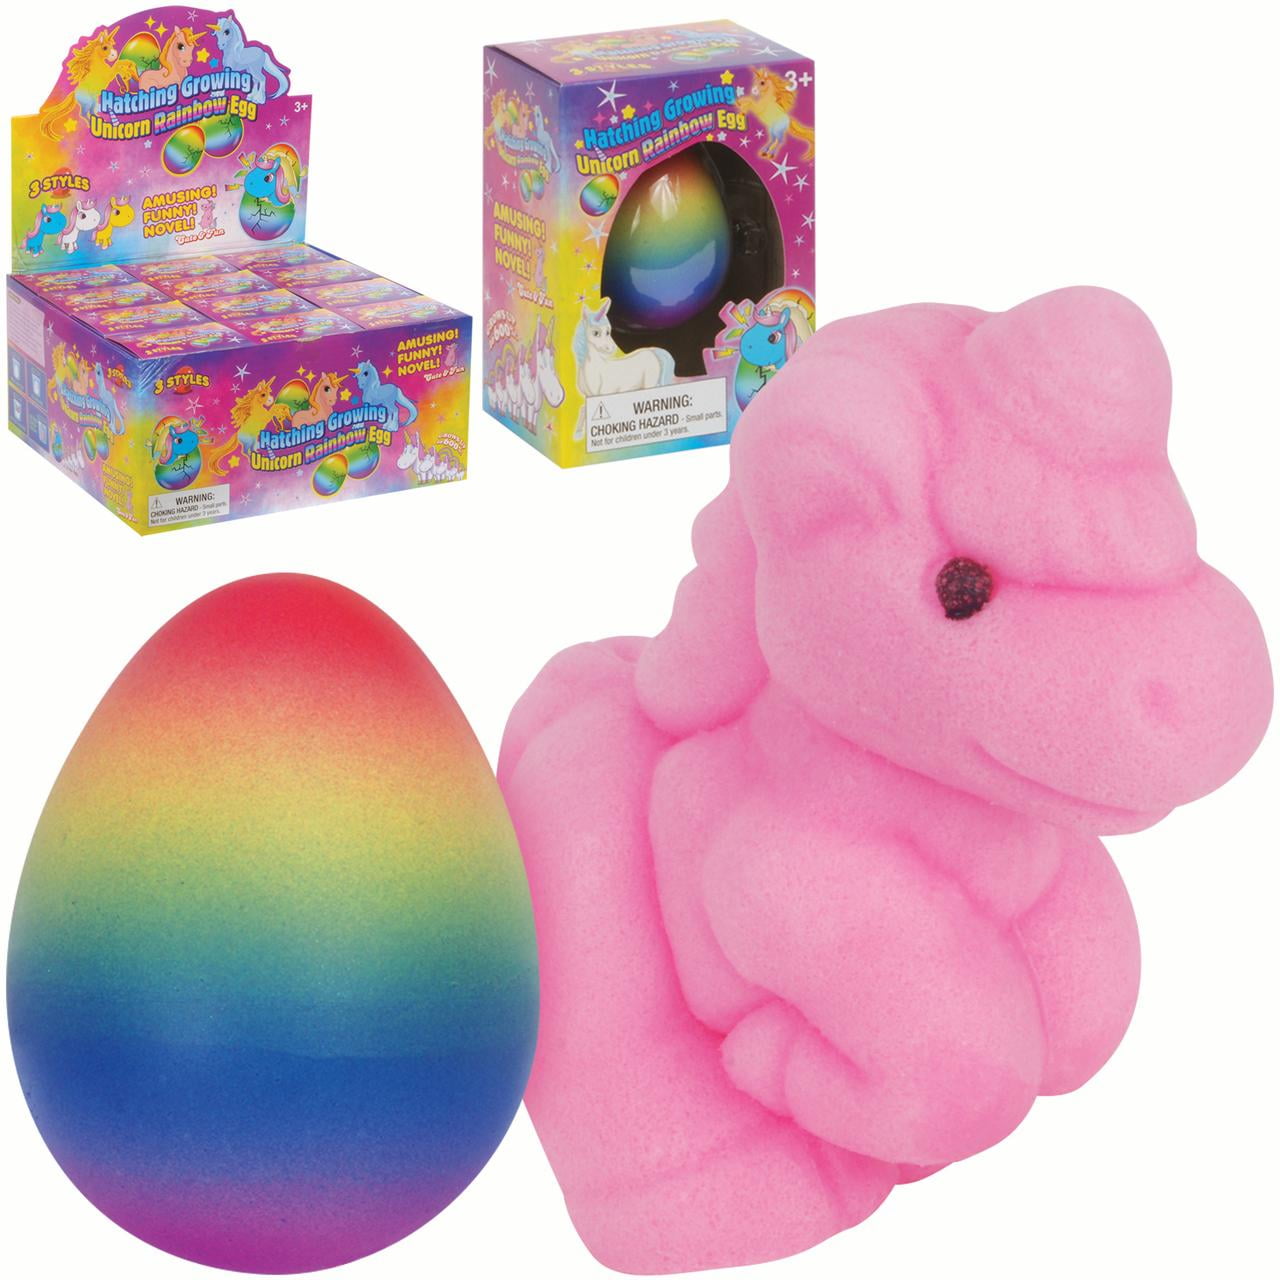 New Large Hatching & Growing Unicorn Egg Toy Gift for Children. 